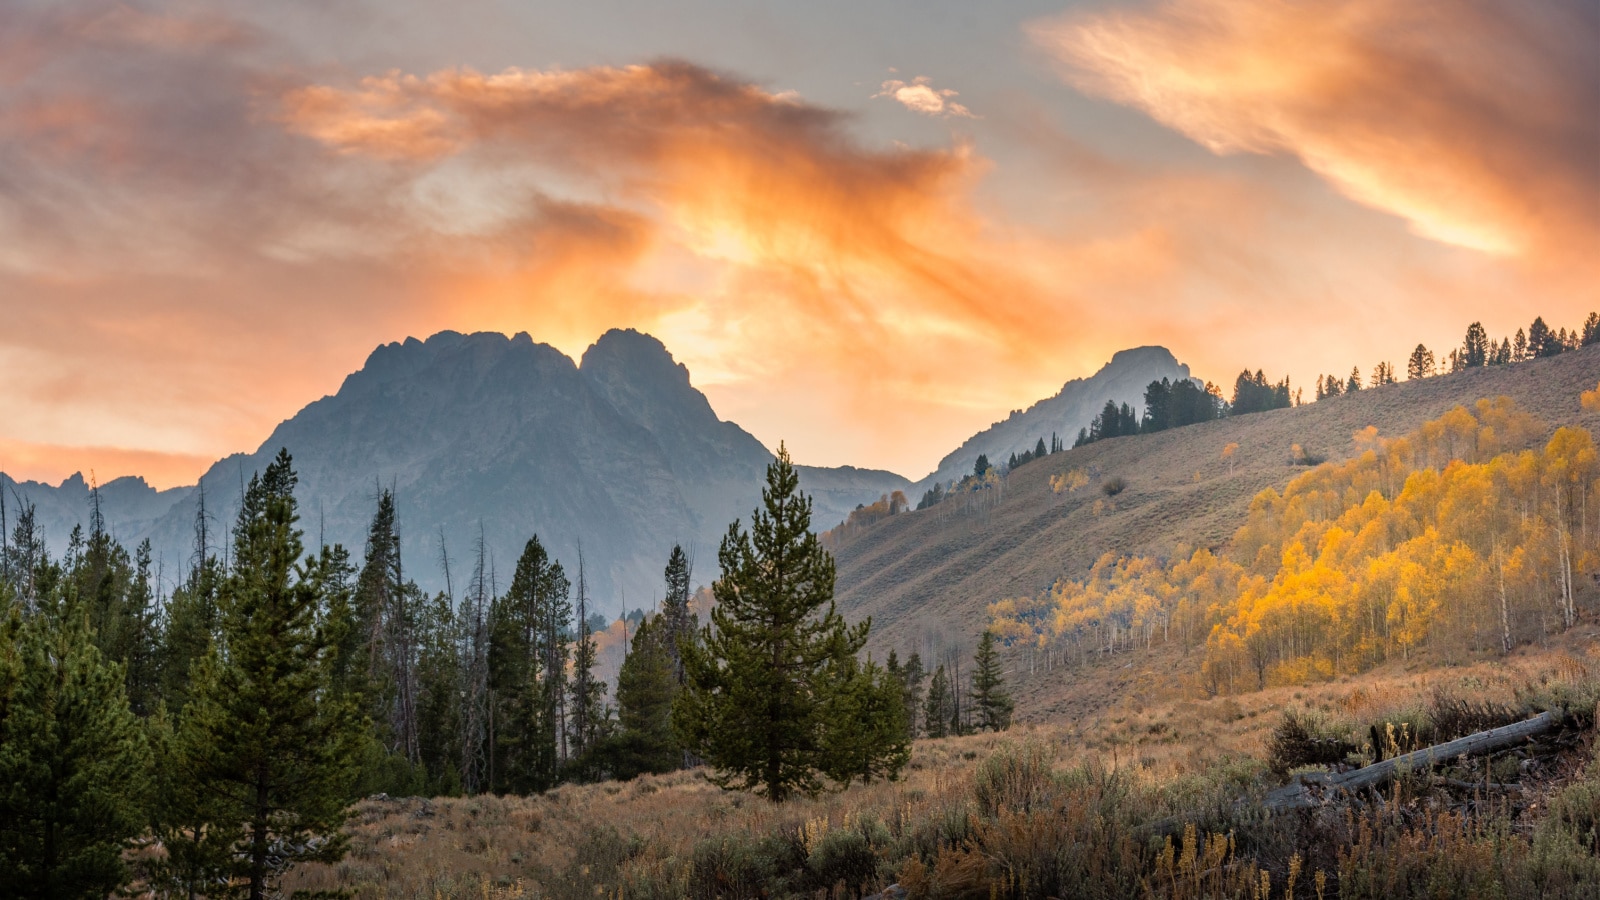 View of the Sawthooth mountains of Idaho in the fall in the evening light.